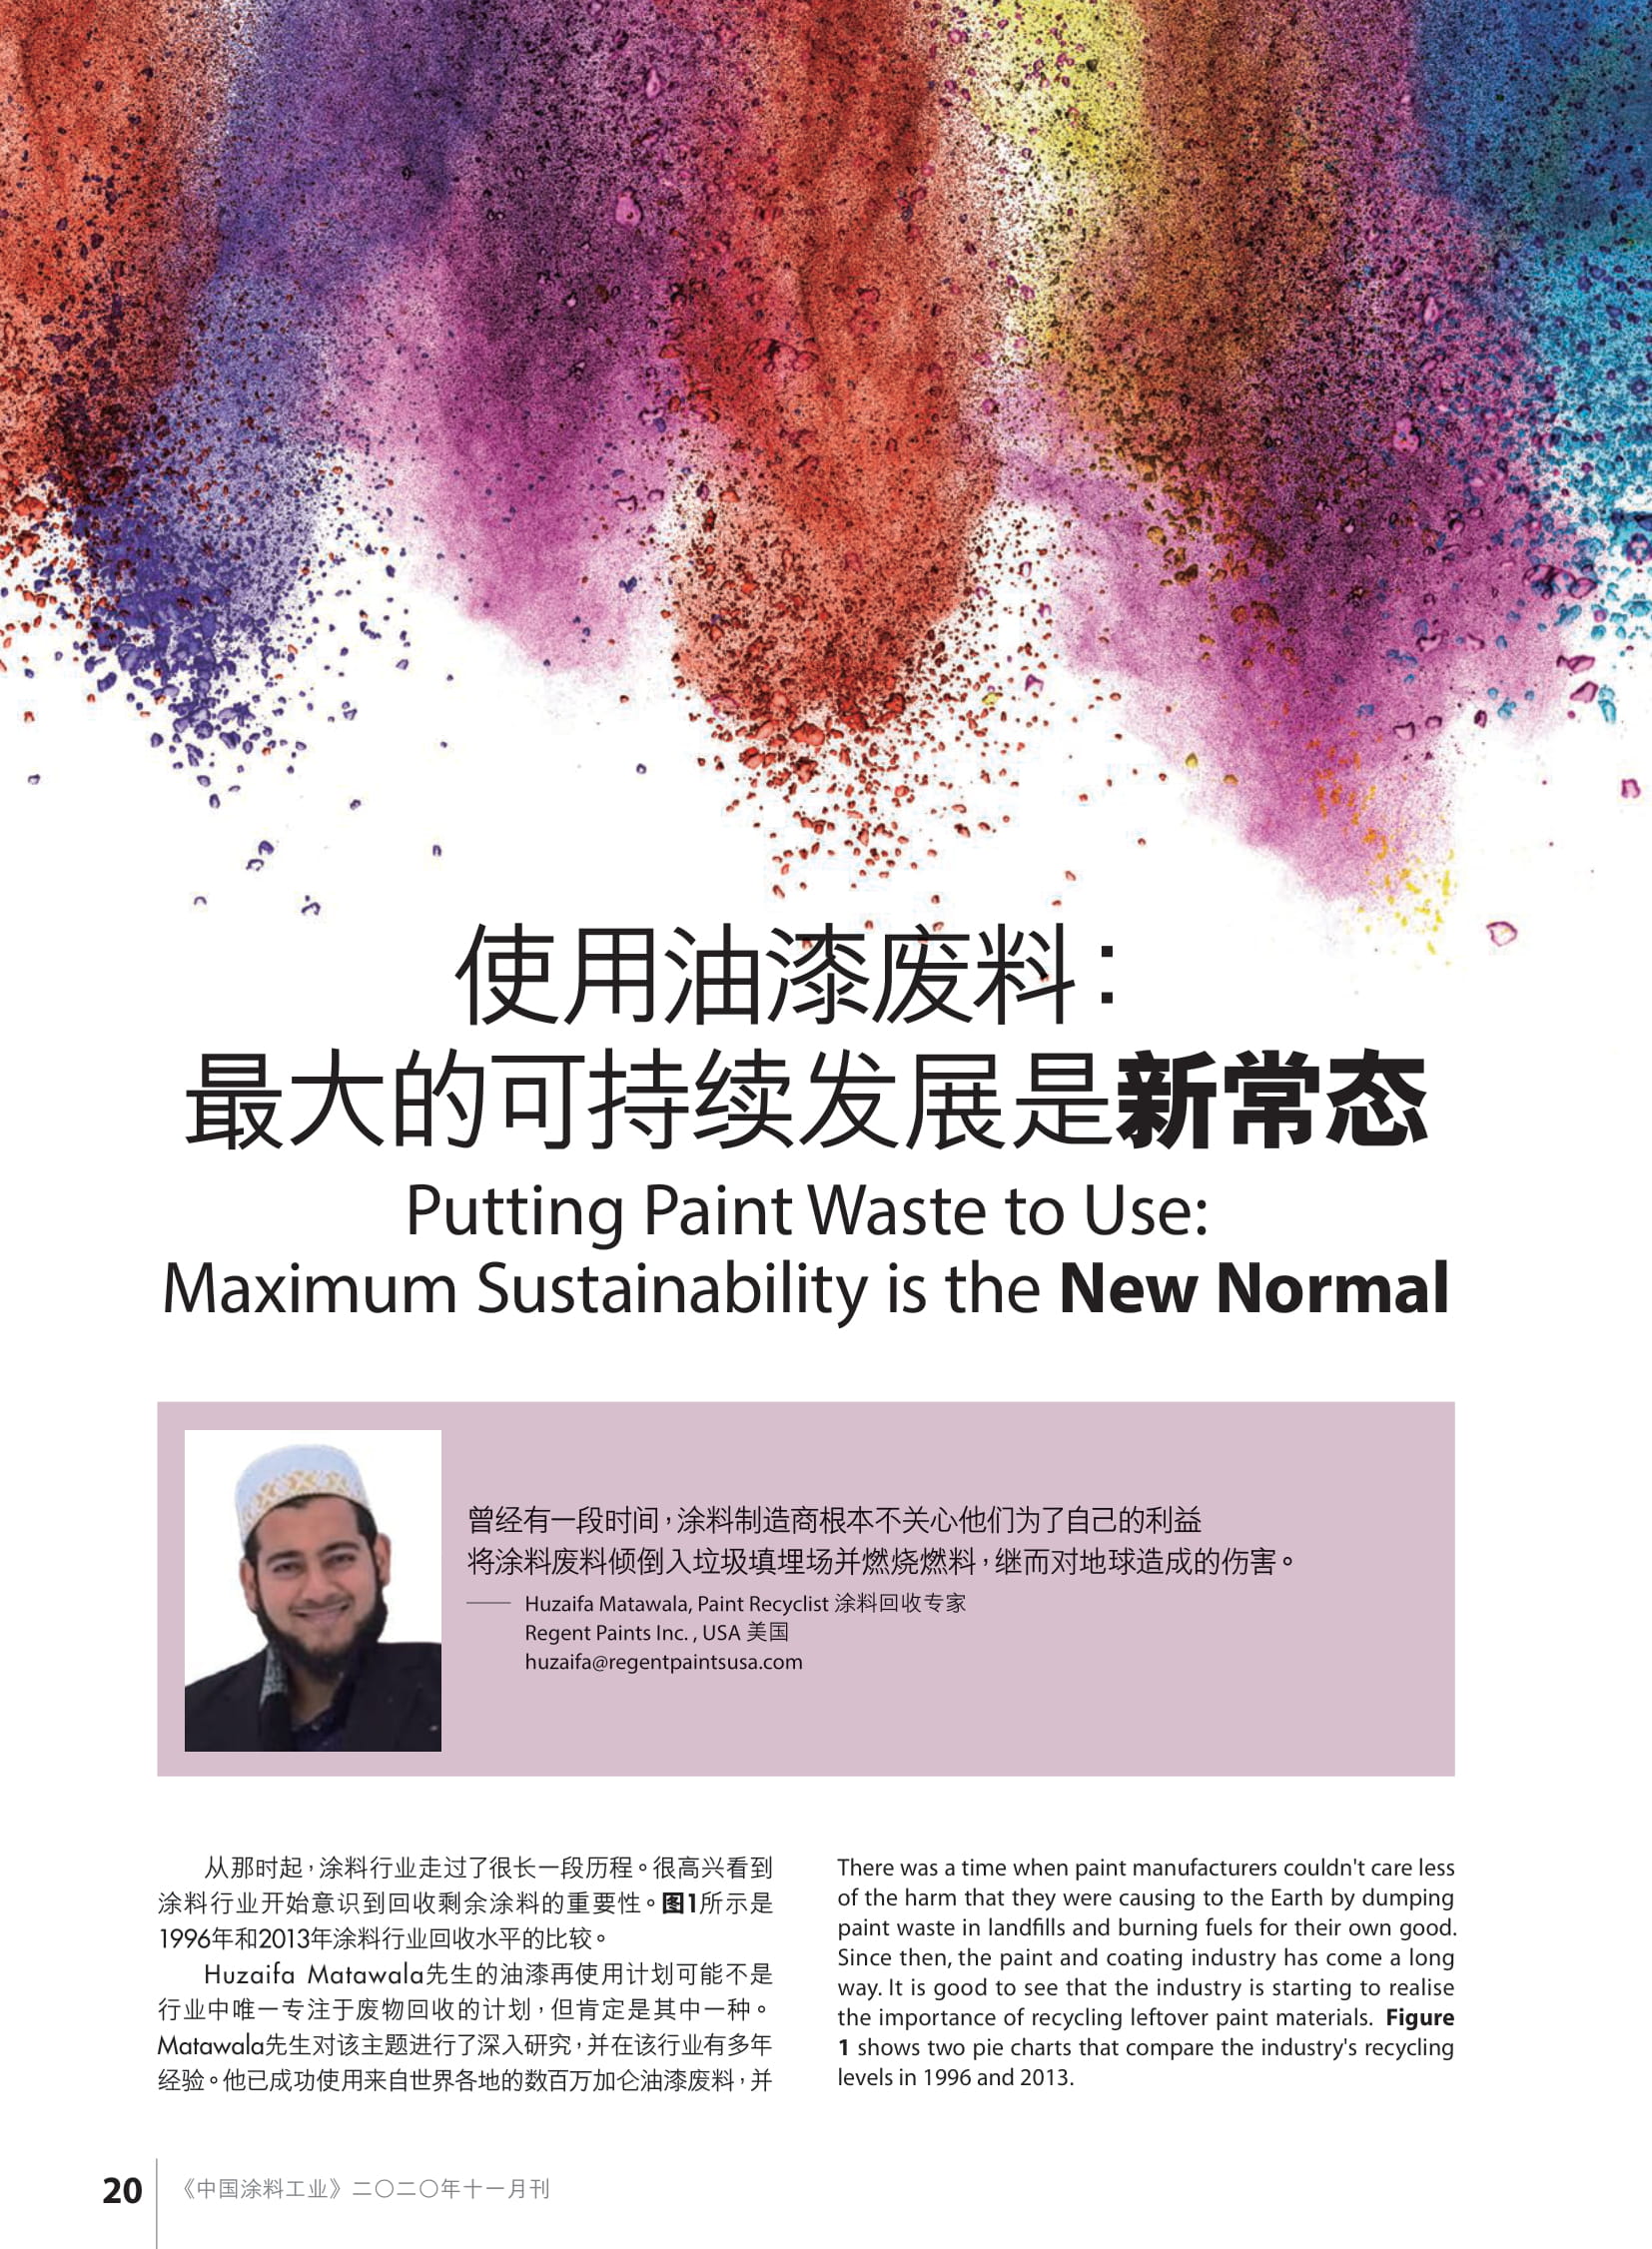 Putting Paint Waste Use Maximum Sustainability is the New Normal